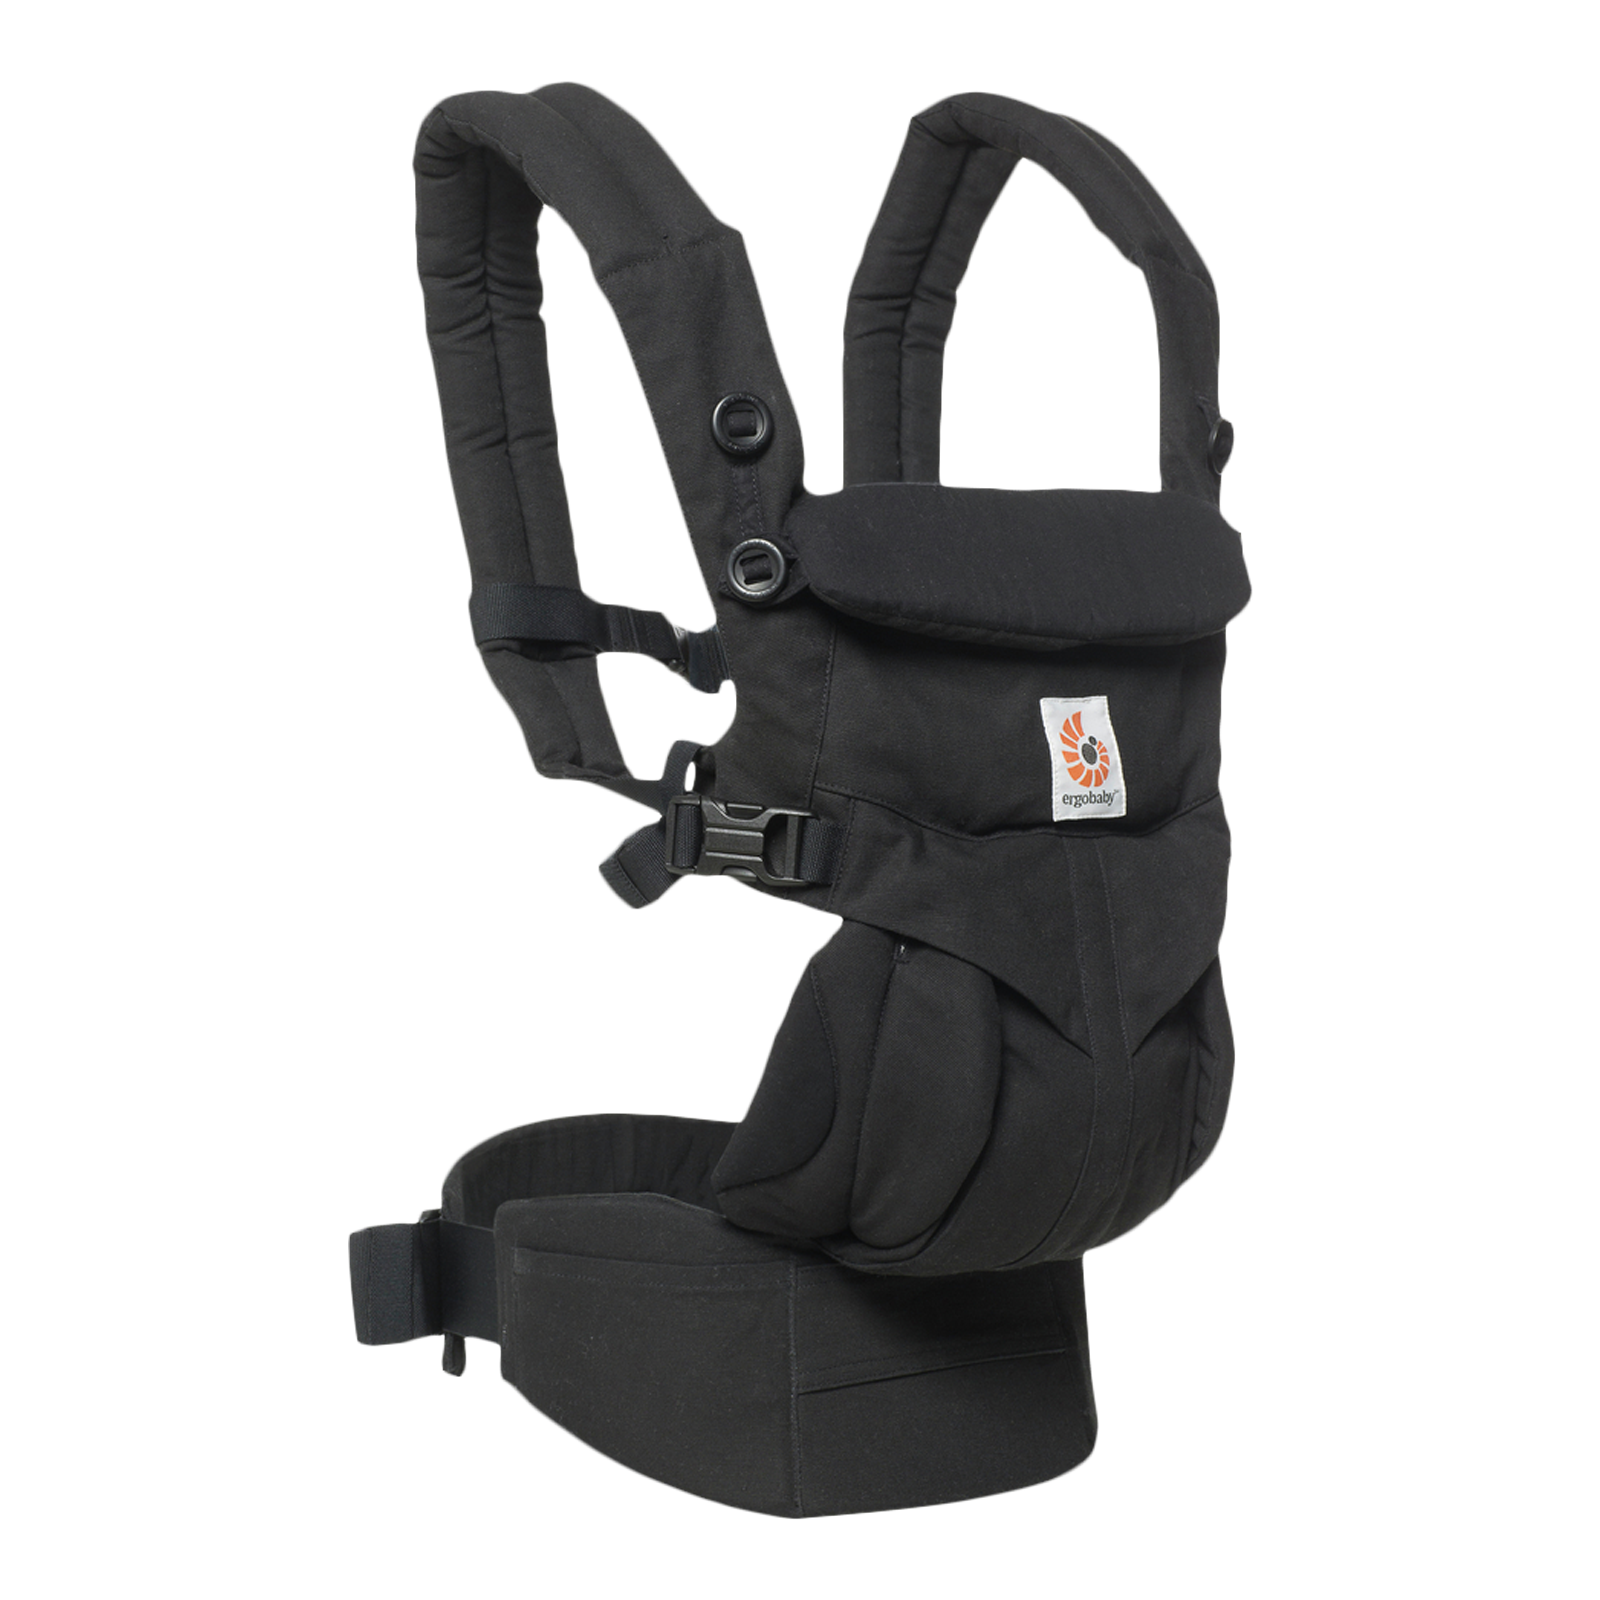 carrier for 18 month old